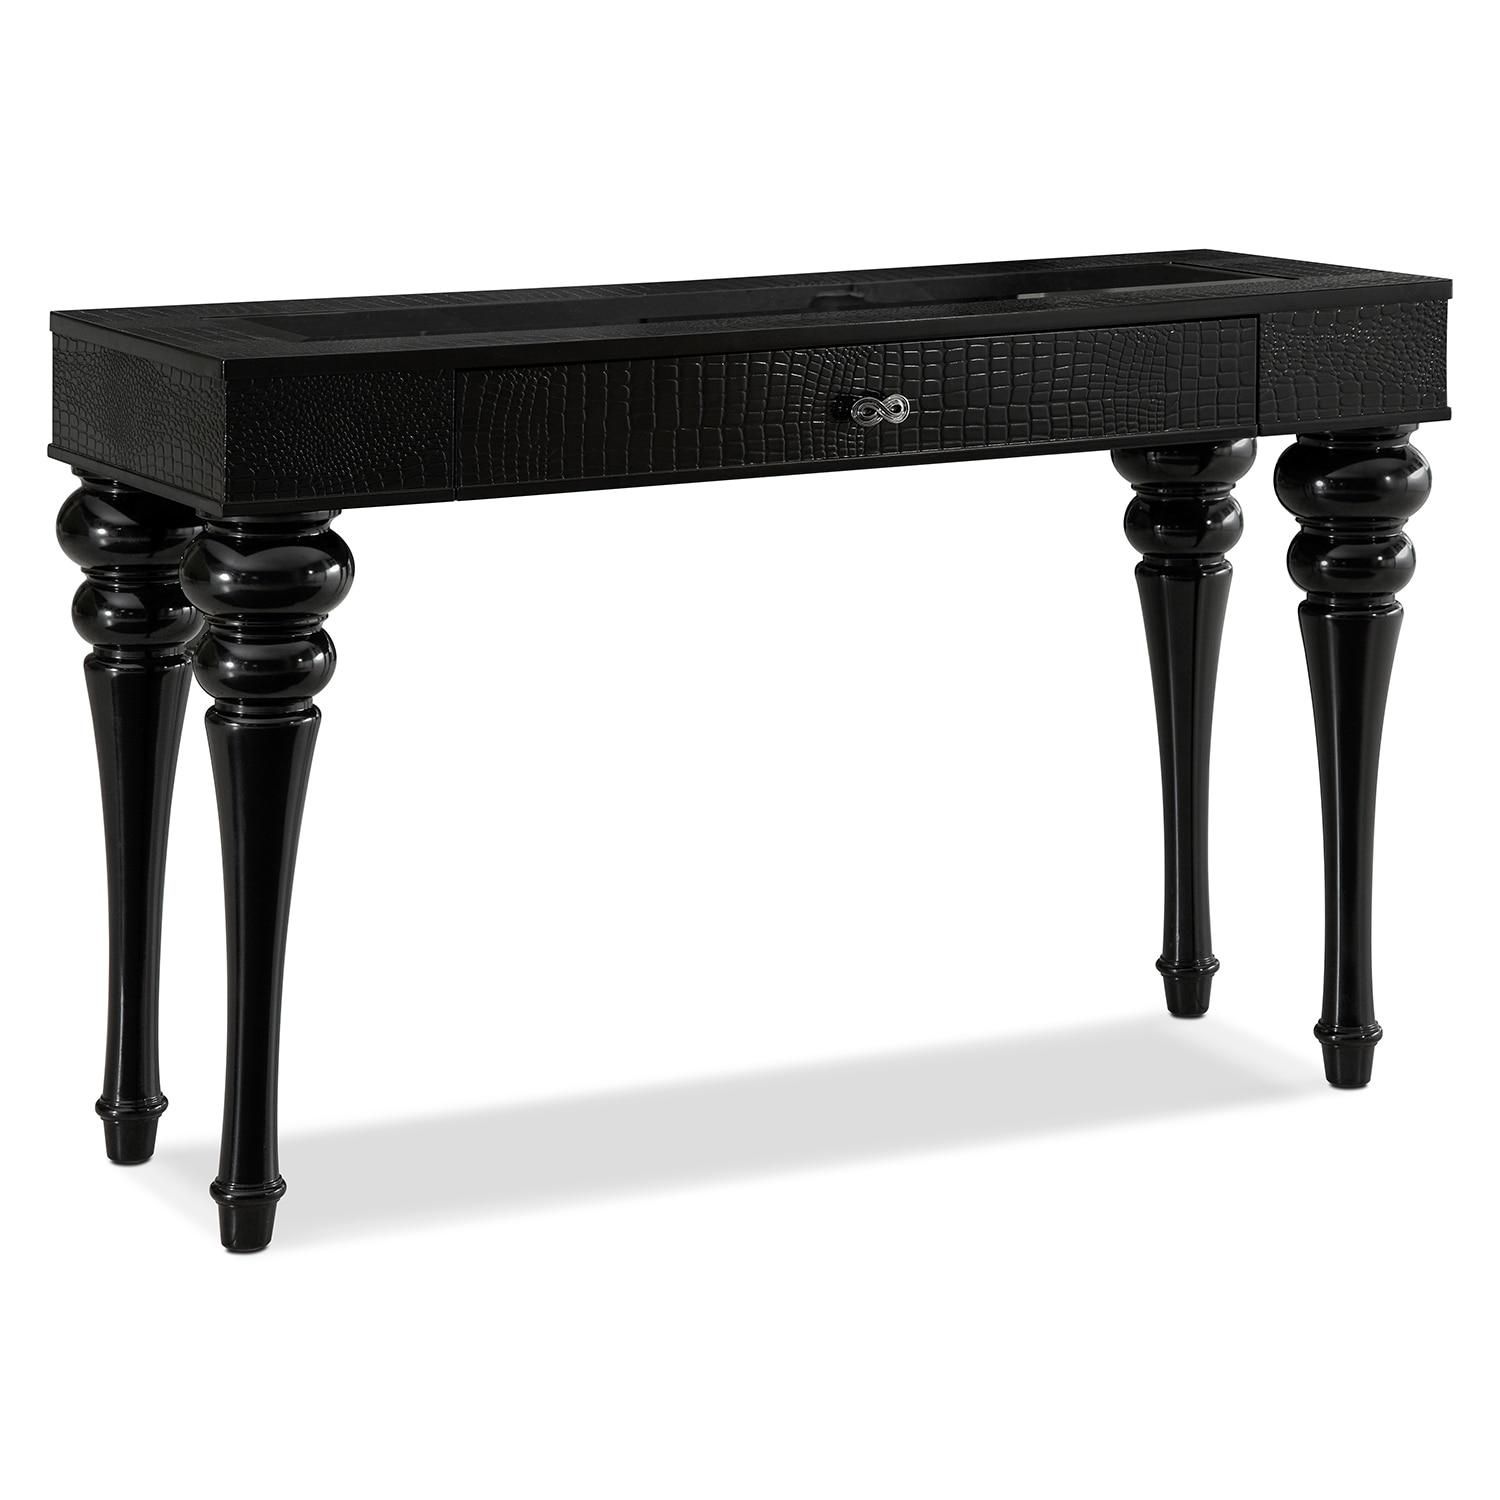 Sofa Tables | Living Room Tables | Value City Furniture Within Sofa Table With Chairs (View 17 of 20)